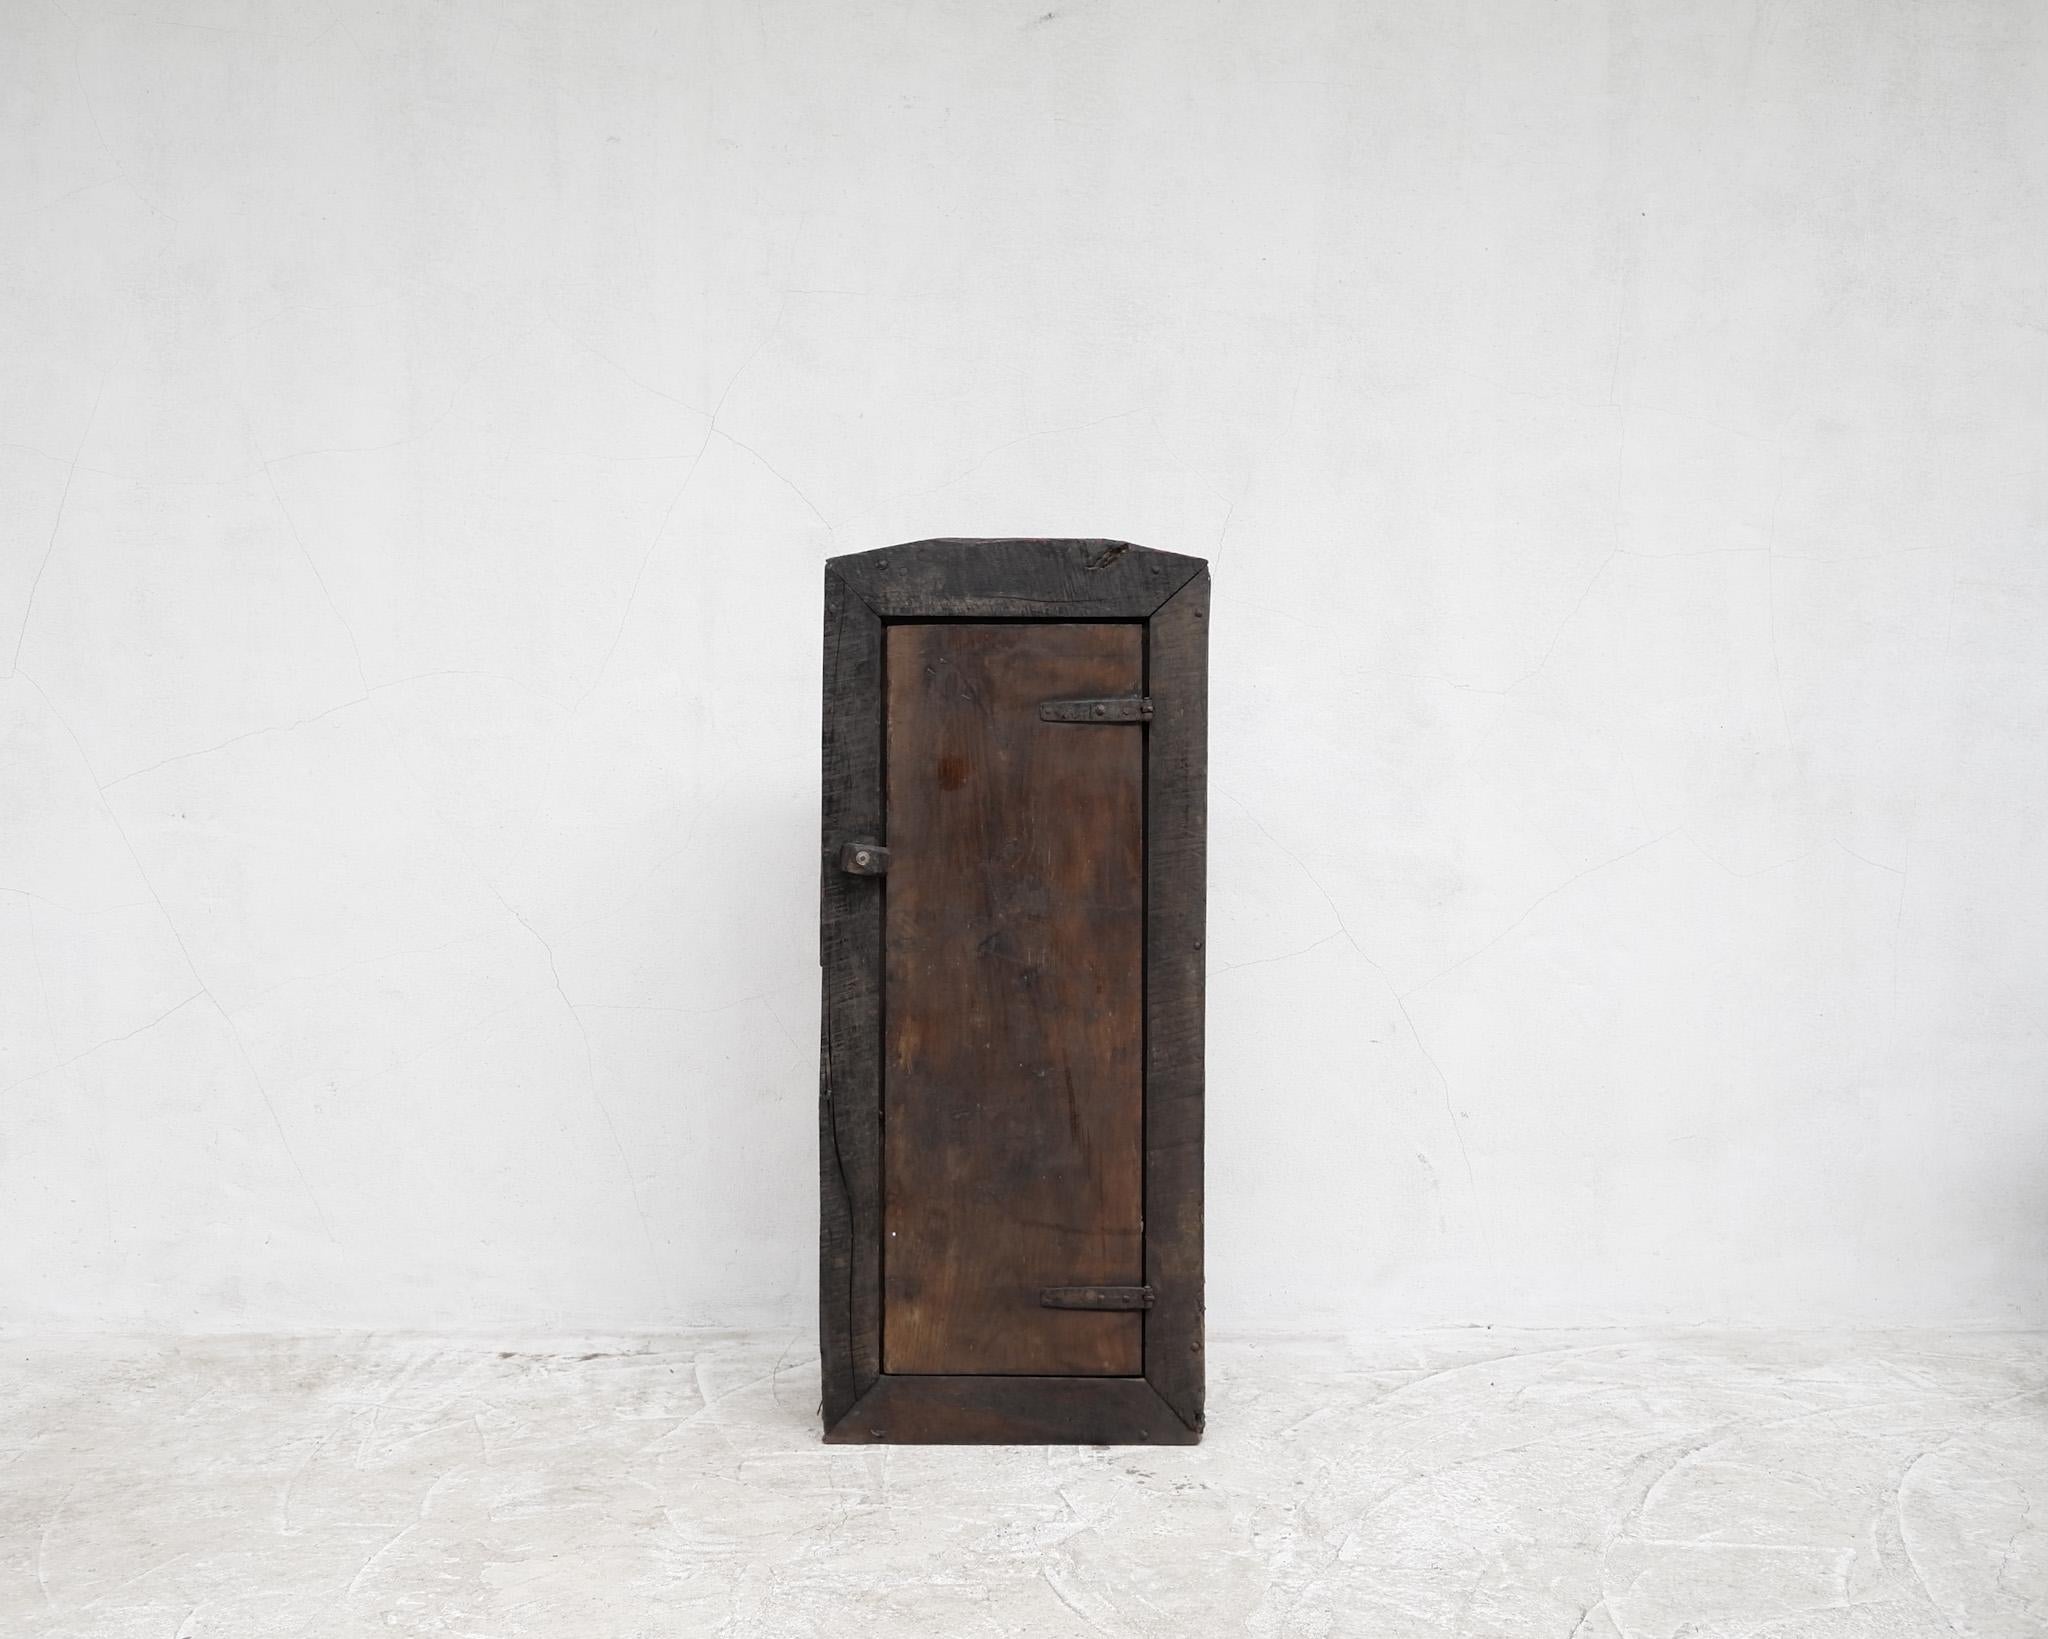 An exceptional Pyrenean 18th C. Mountain cupboard.

Constructed from thick slabs of hewn chestnut.

Heavily Heavily Patinated due to hundreds of years of use.

Totally pure Spanish vernacular furniture.
  

(Two others available in separate